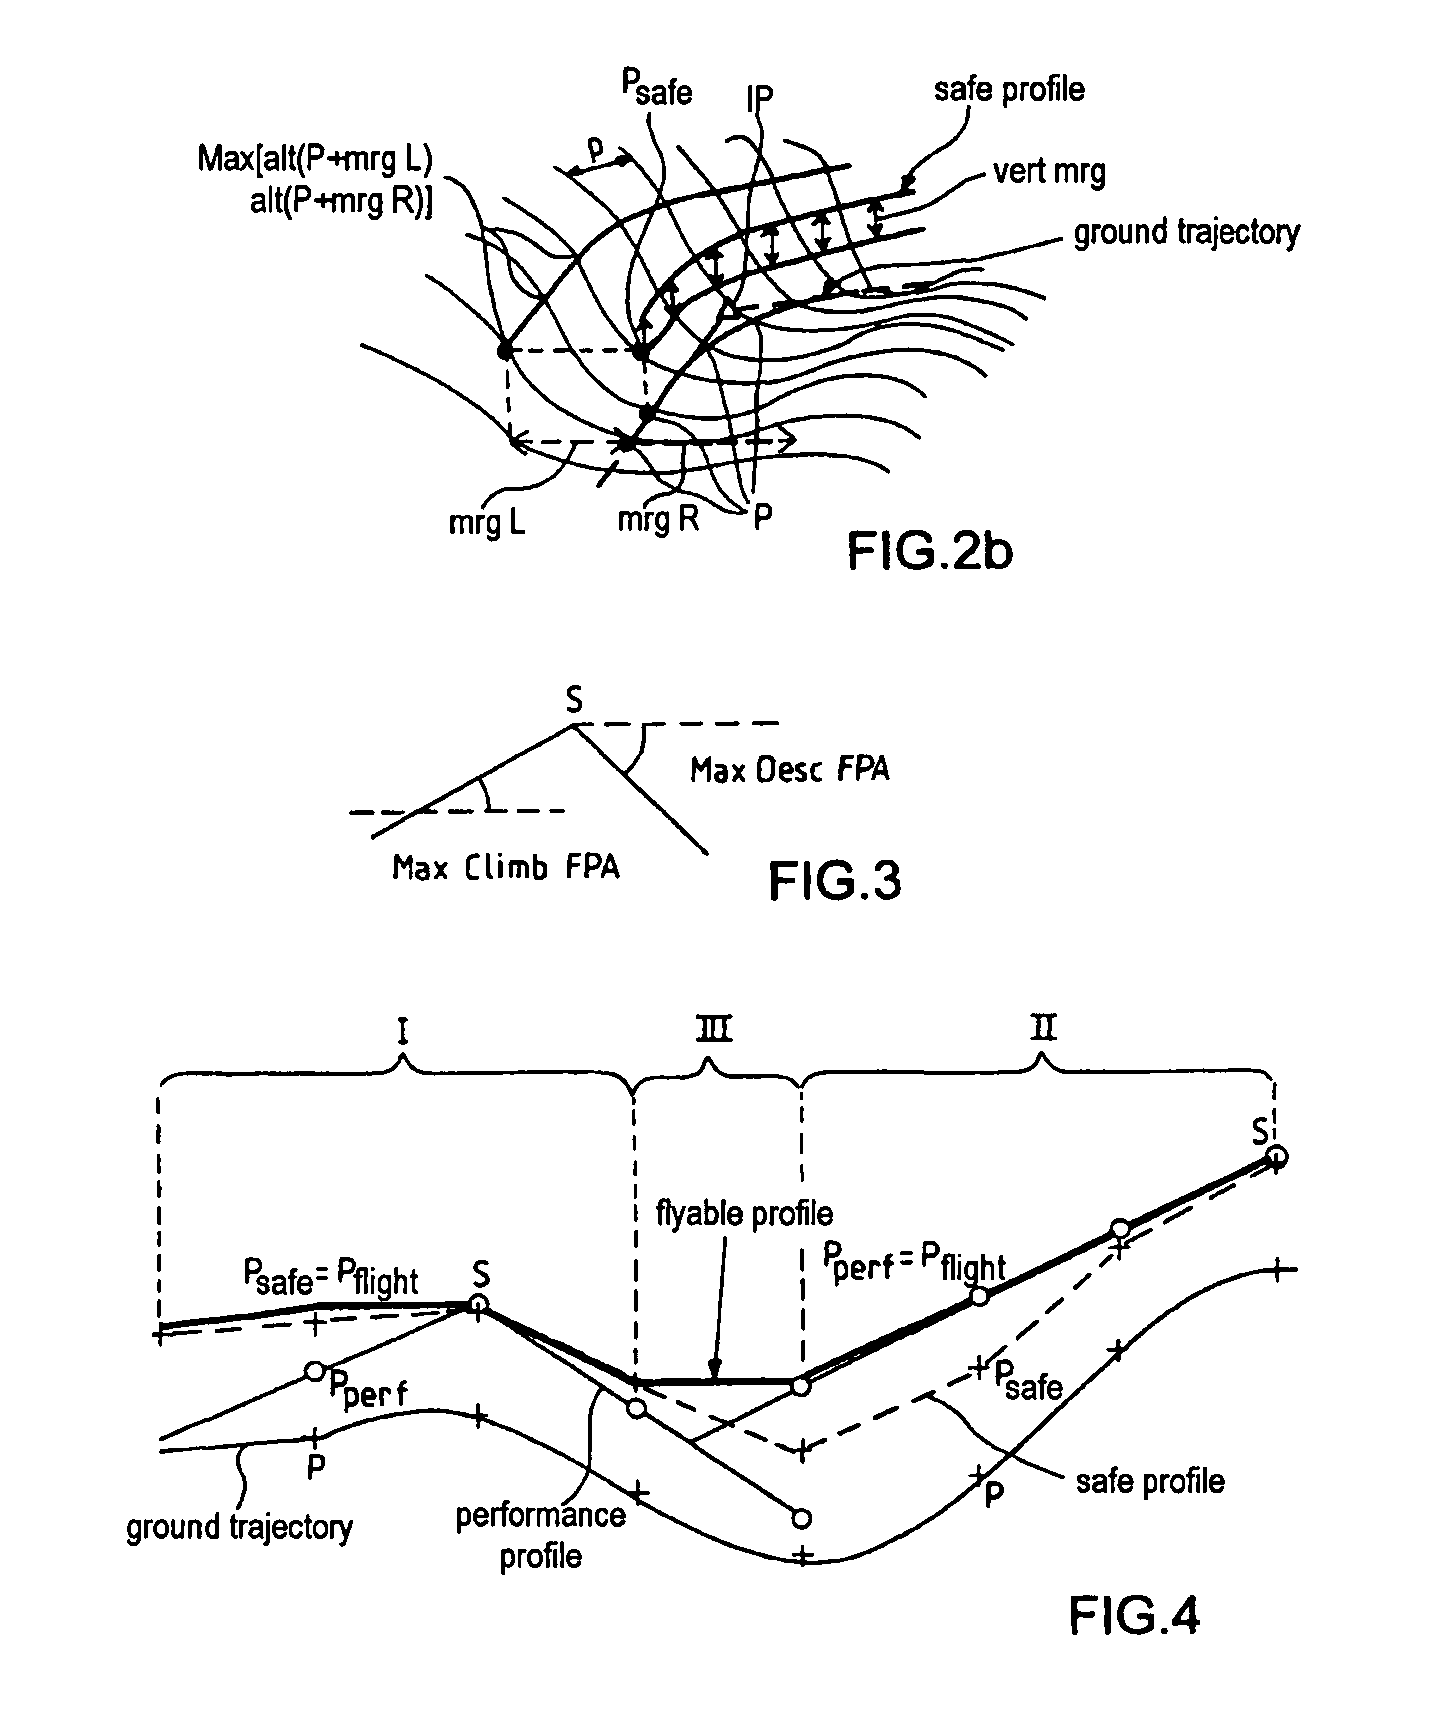 Method for assisting low altitude navigation of an aircraft